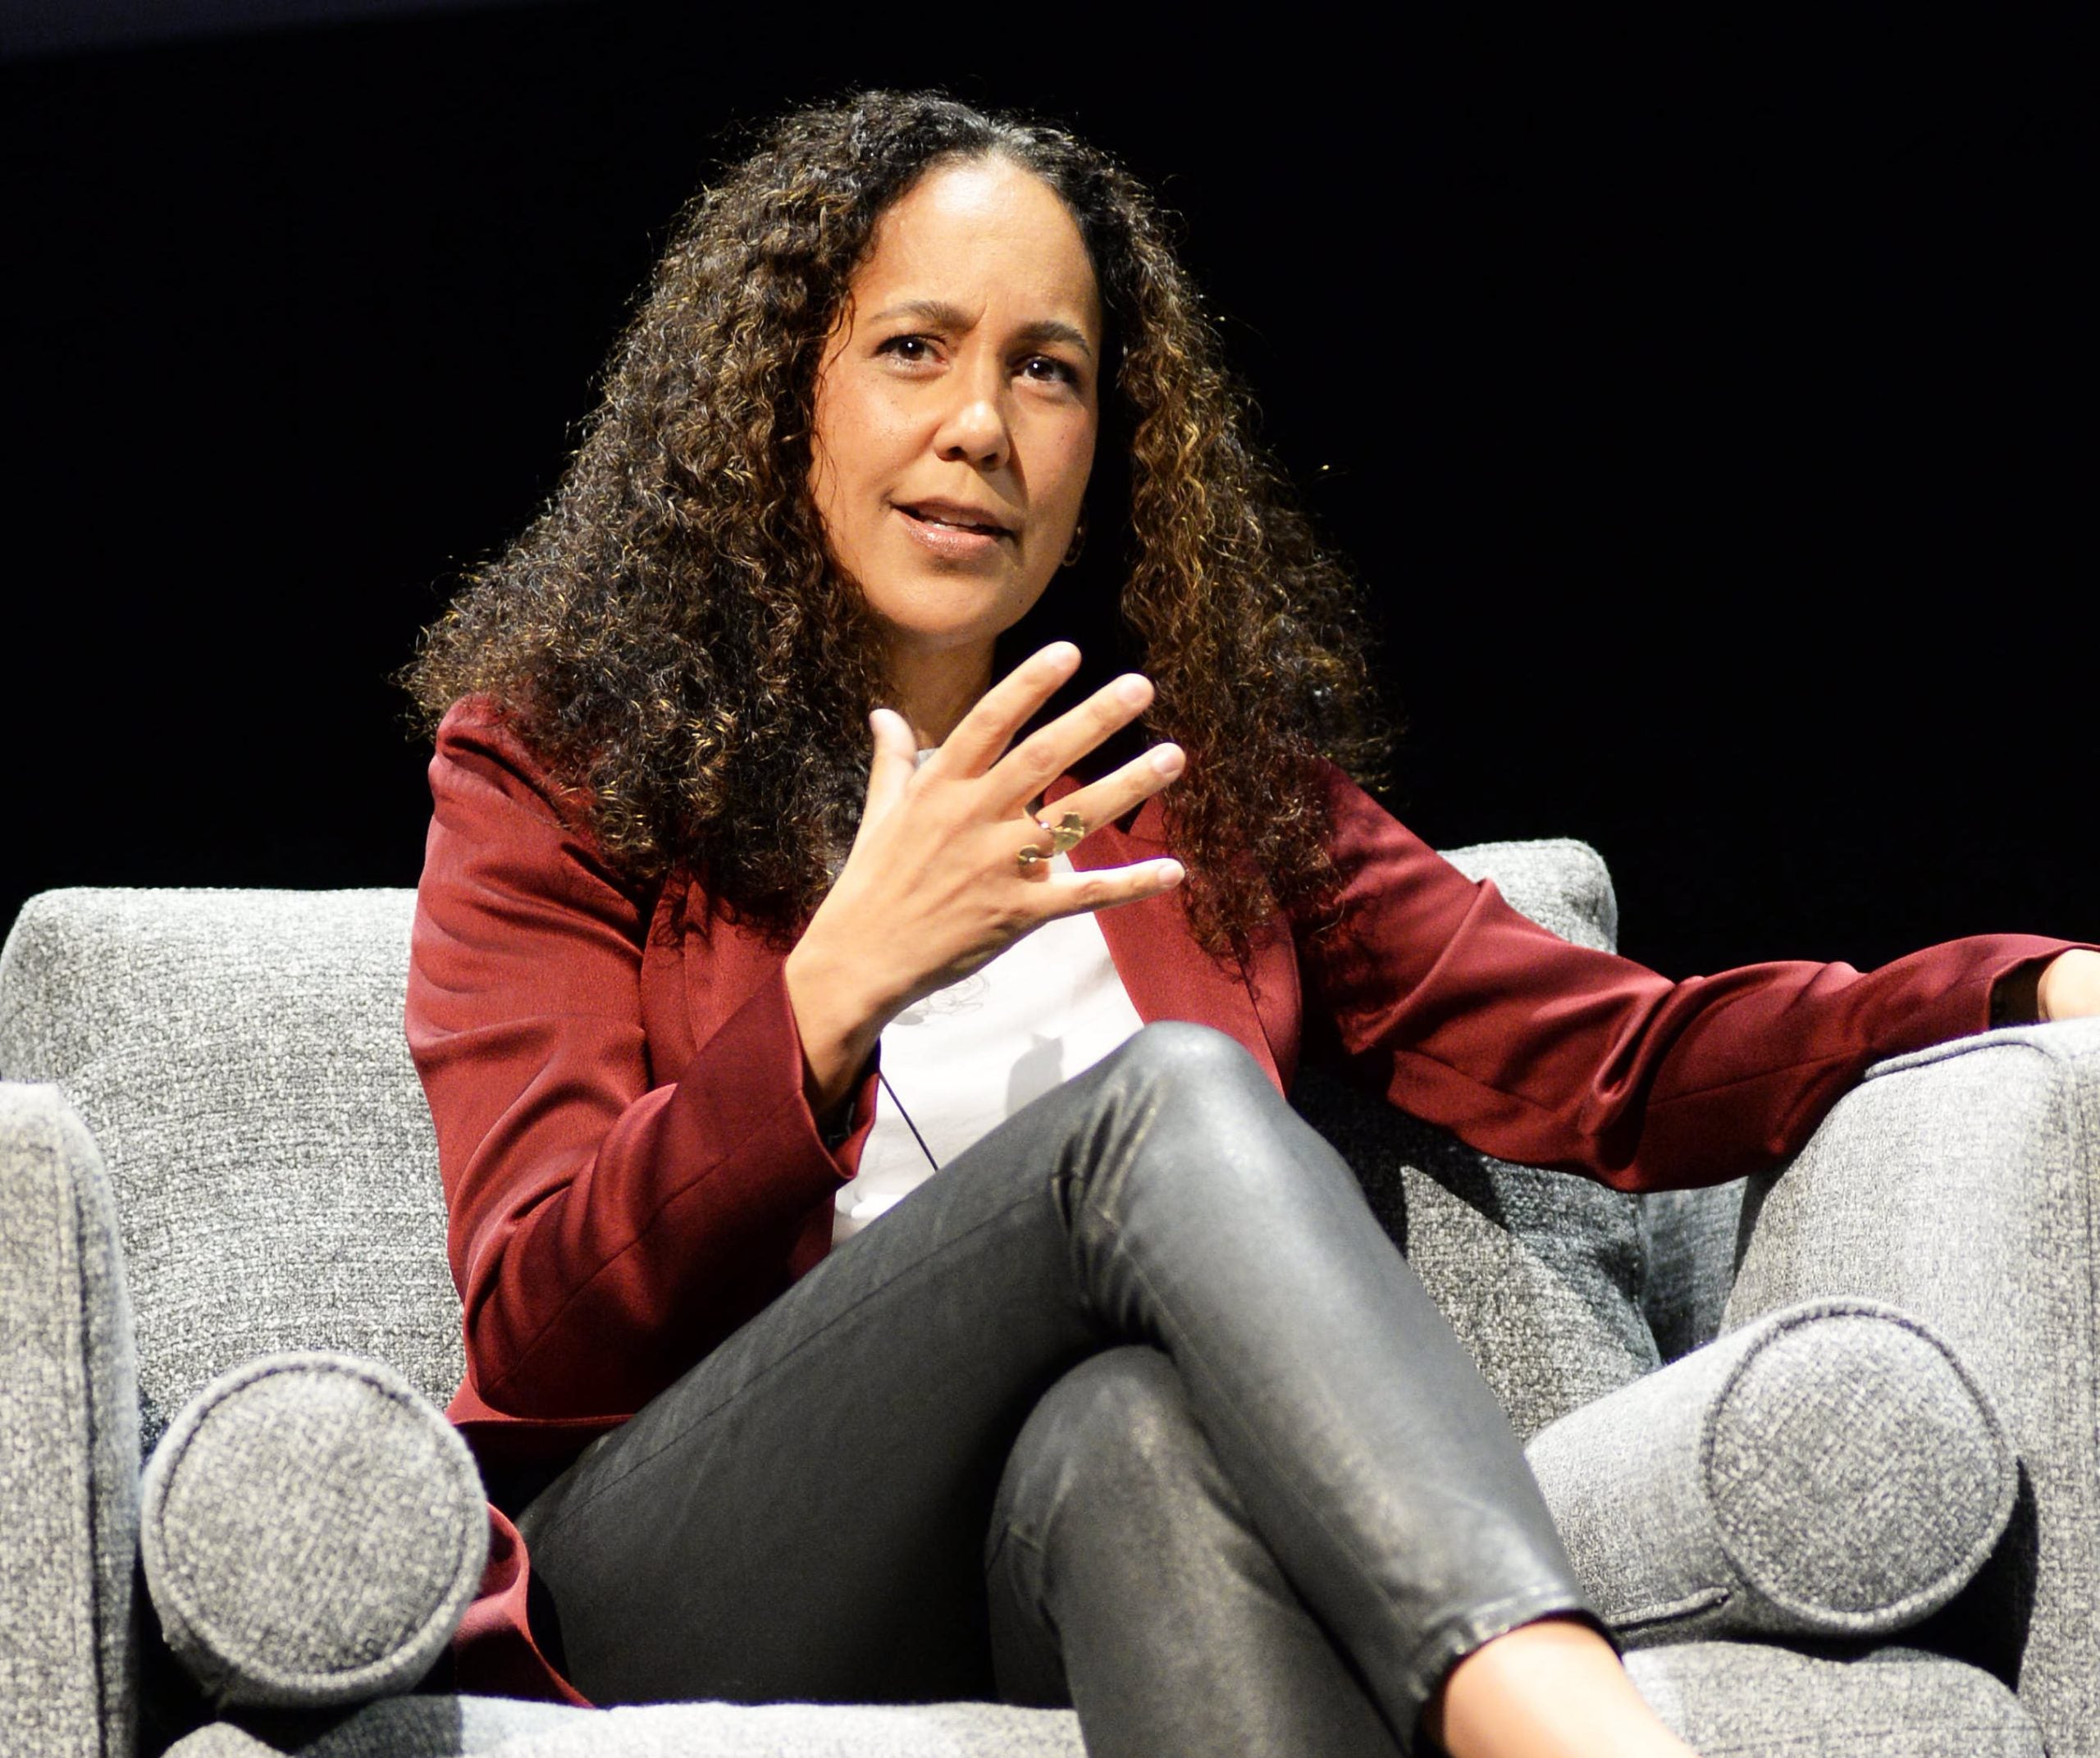 Gina Prince-Bythewood Responds To “Eye-Opening” Snubs For Black Women At The Oscars